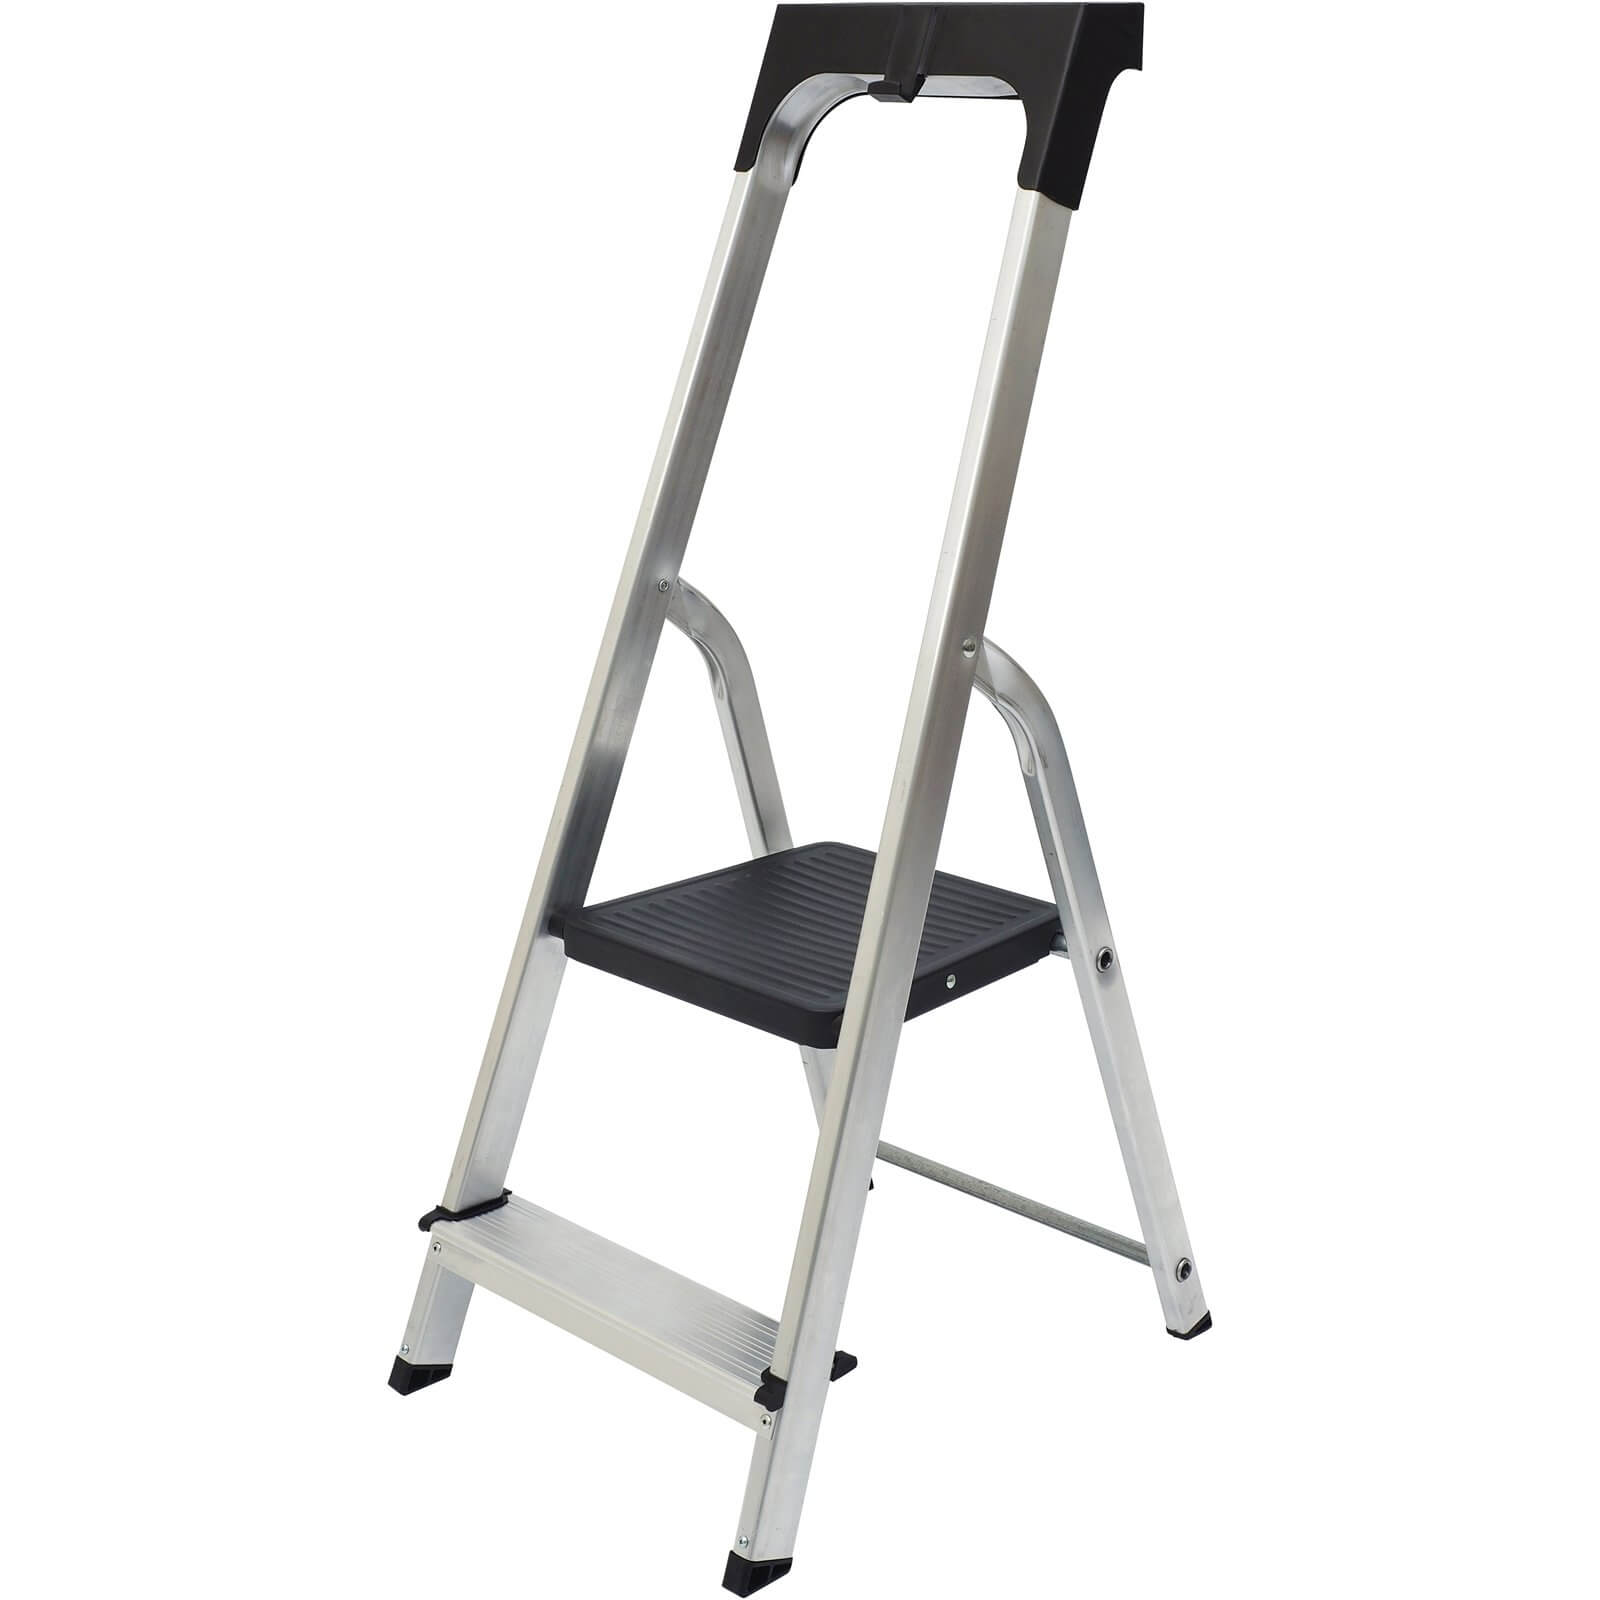 Werner High Handrail Step Ladder with Tool Tray - 2 Tread